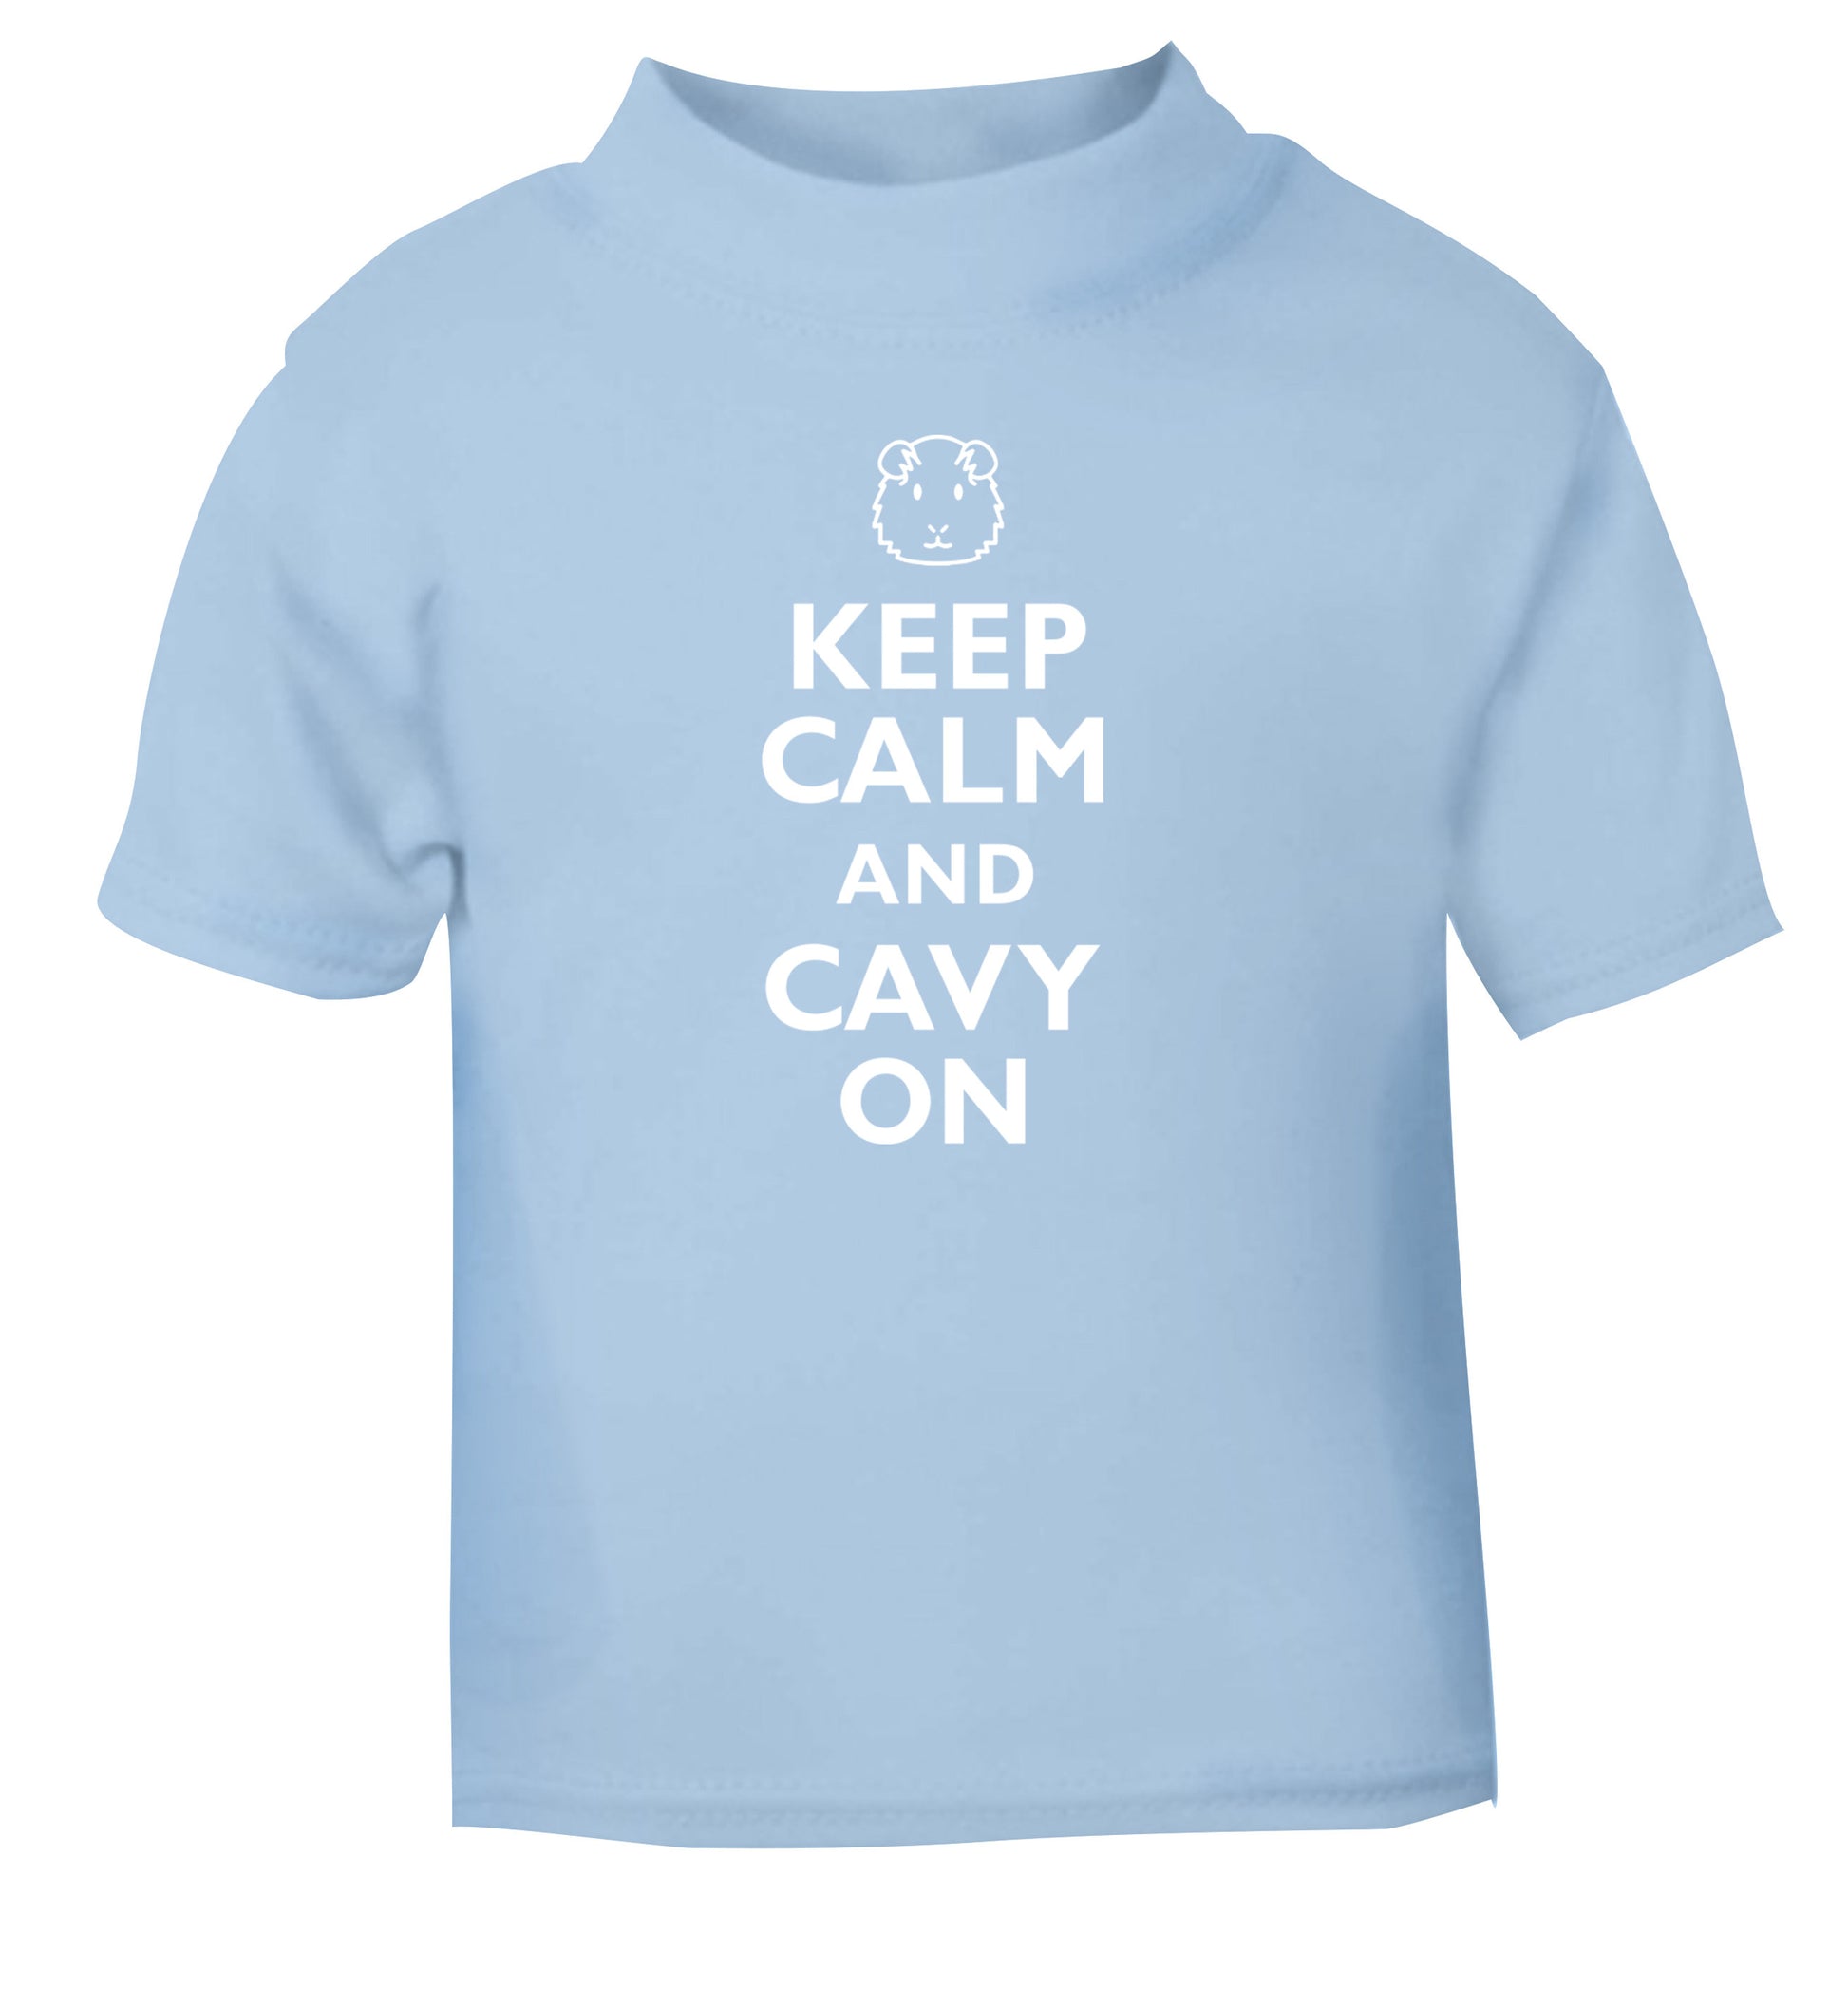 Keep calm and cavvy on light blue Baby Toddler Tshirt 2 Years